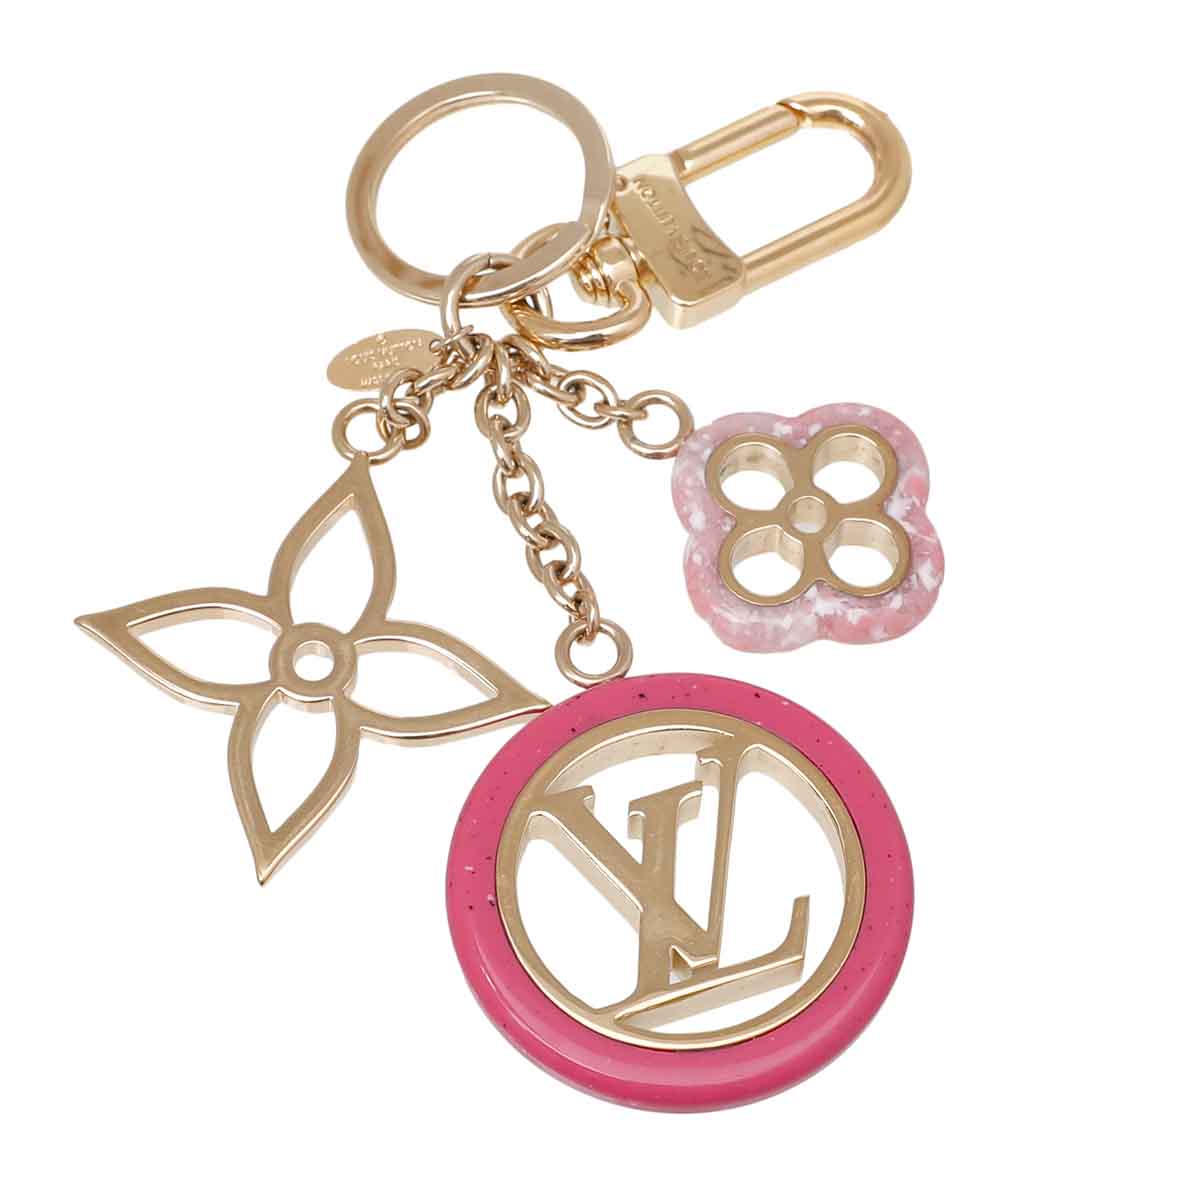 Louis Vuitton Colorline Ring Bag Charm And Key Holder